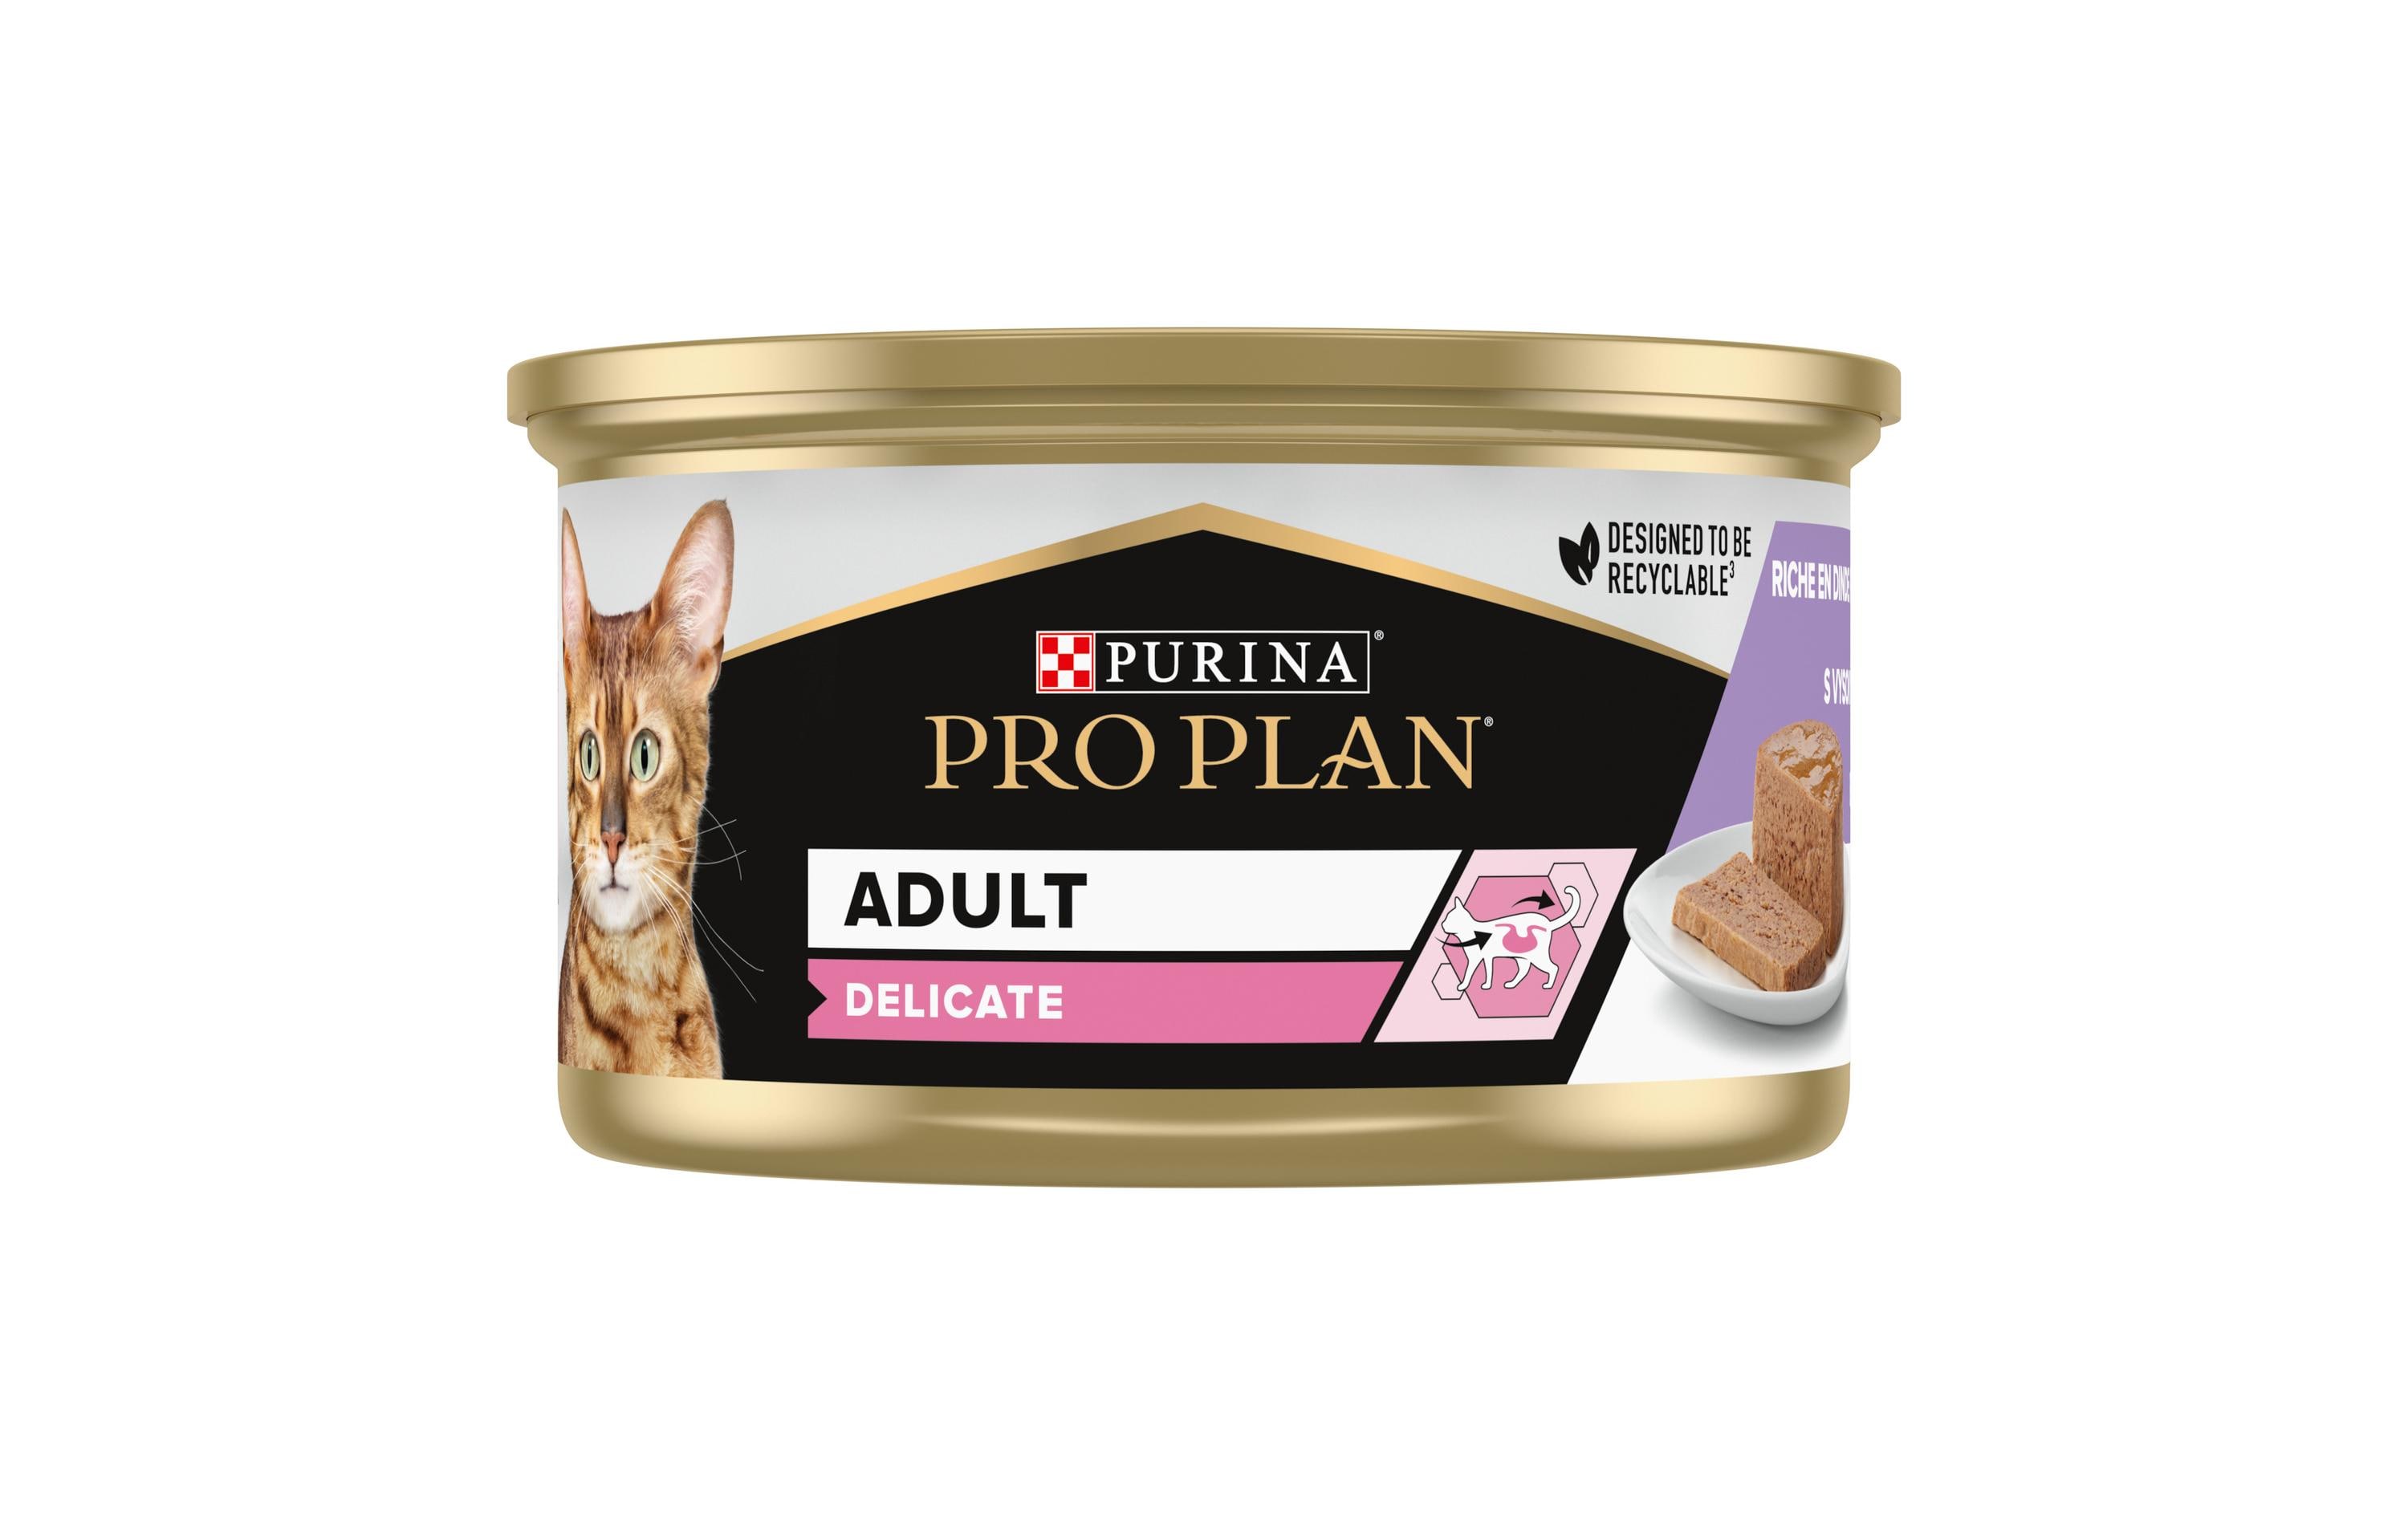 Purina Pro Plan Nassfutter Adult Delicate Truthahn, 24 x 85 g